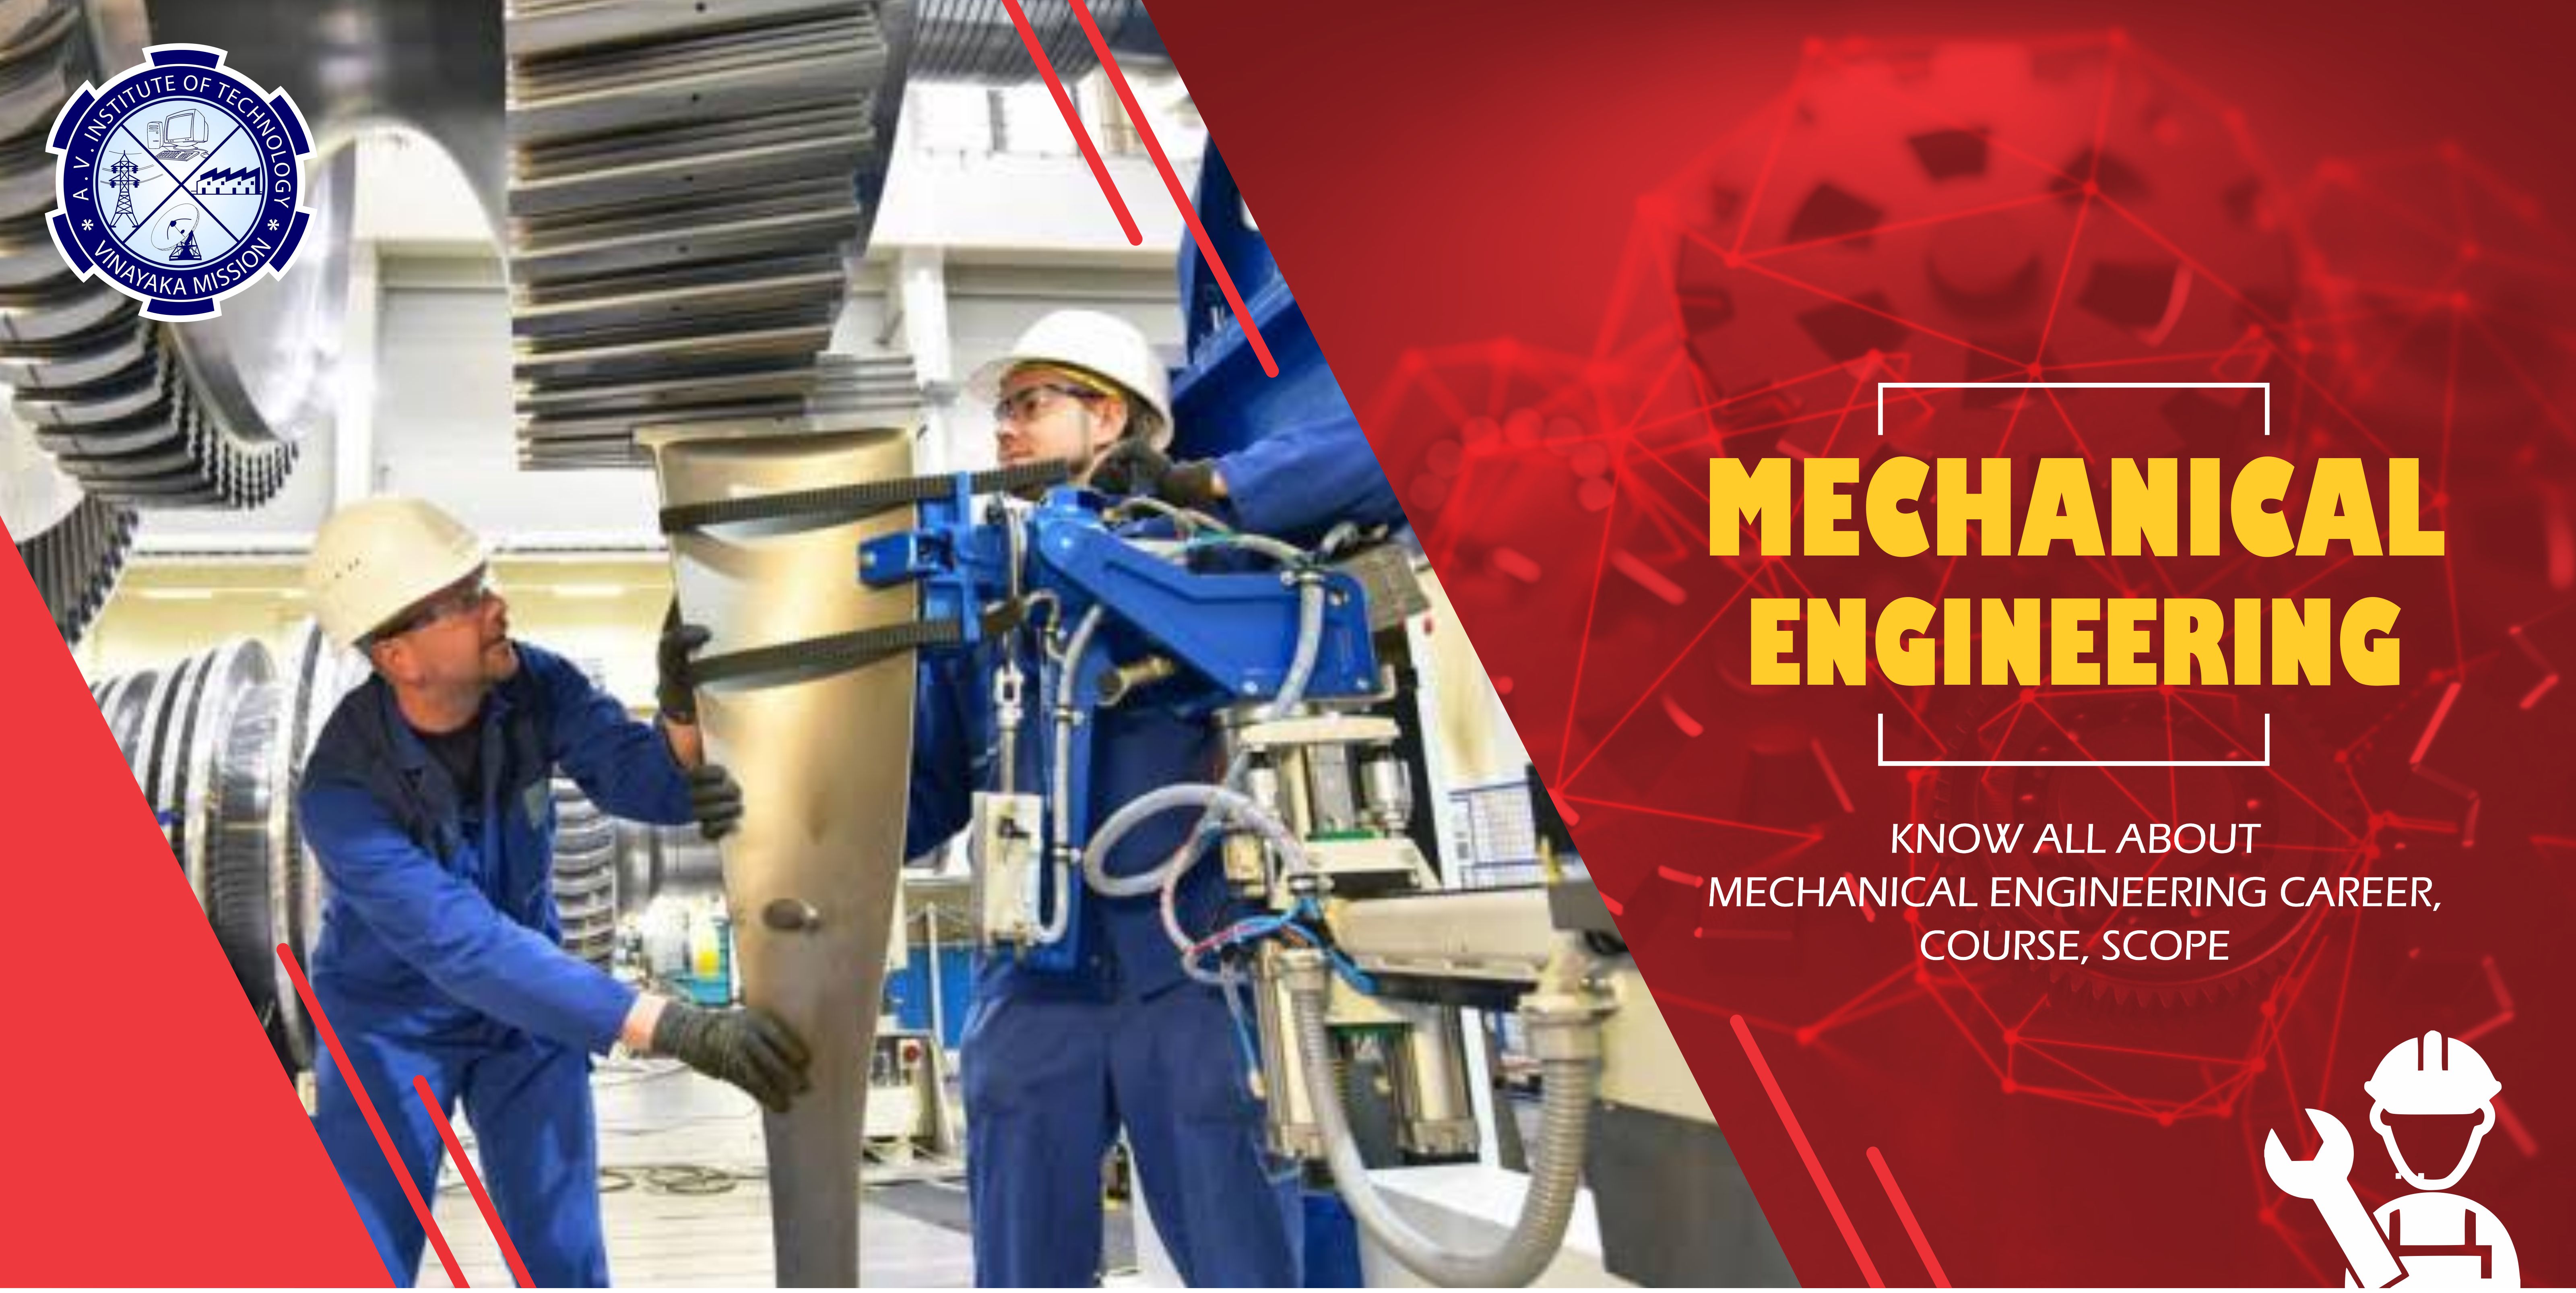 Mechanical Engineering: Know All About Mechanical Engineering Career, Course, Scope